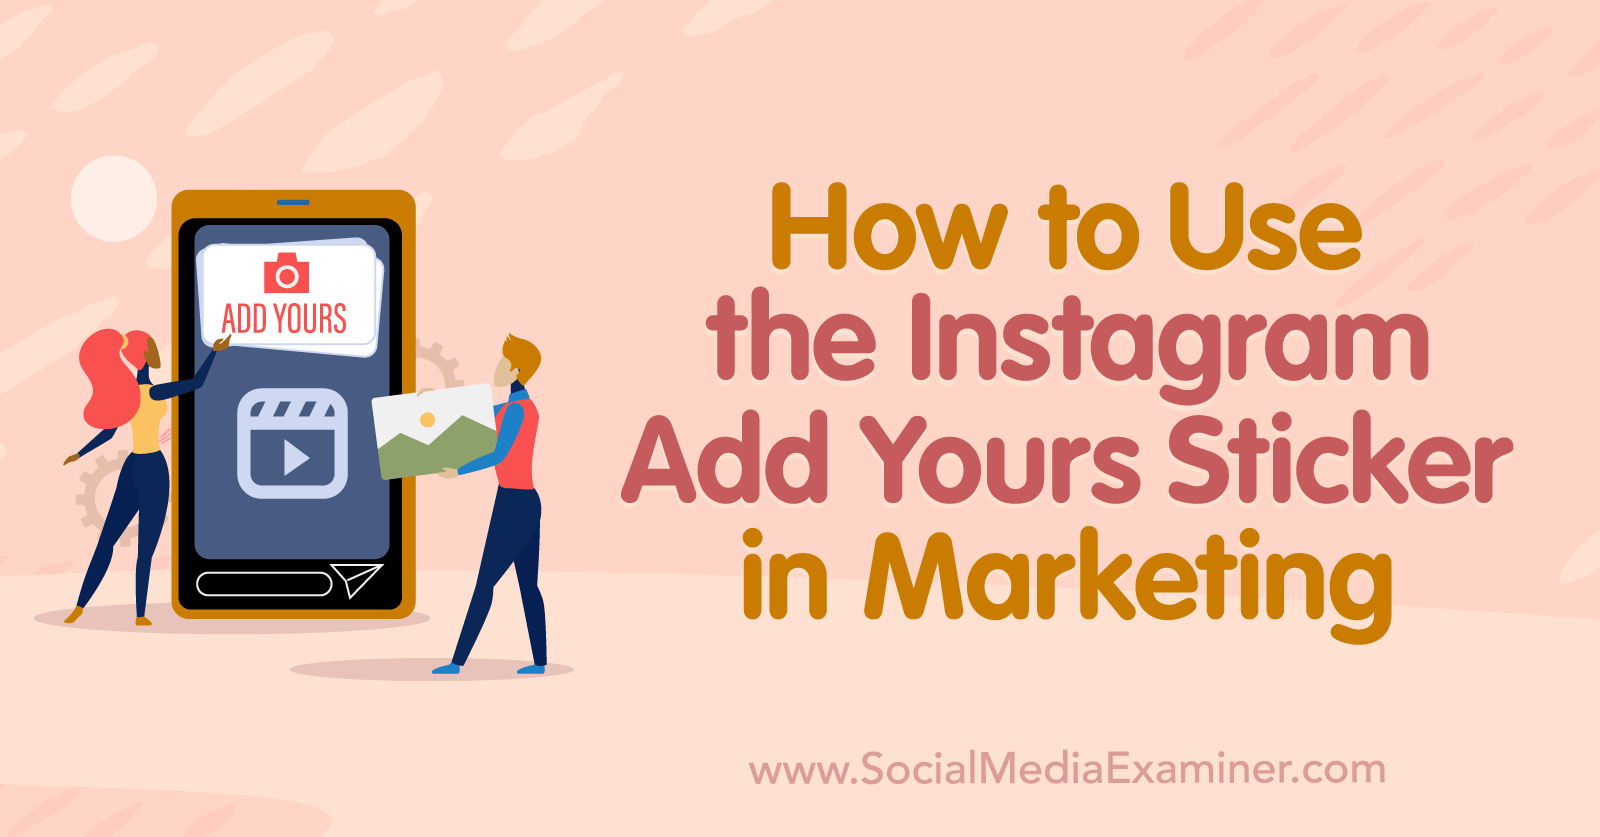 How to Use the Instagram Add Yours Sticker in Marketing-Social Media examiner